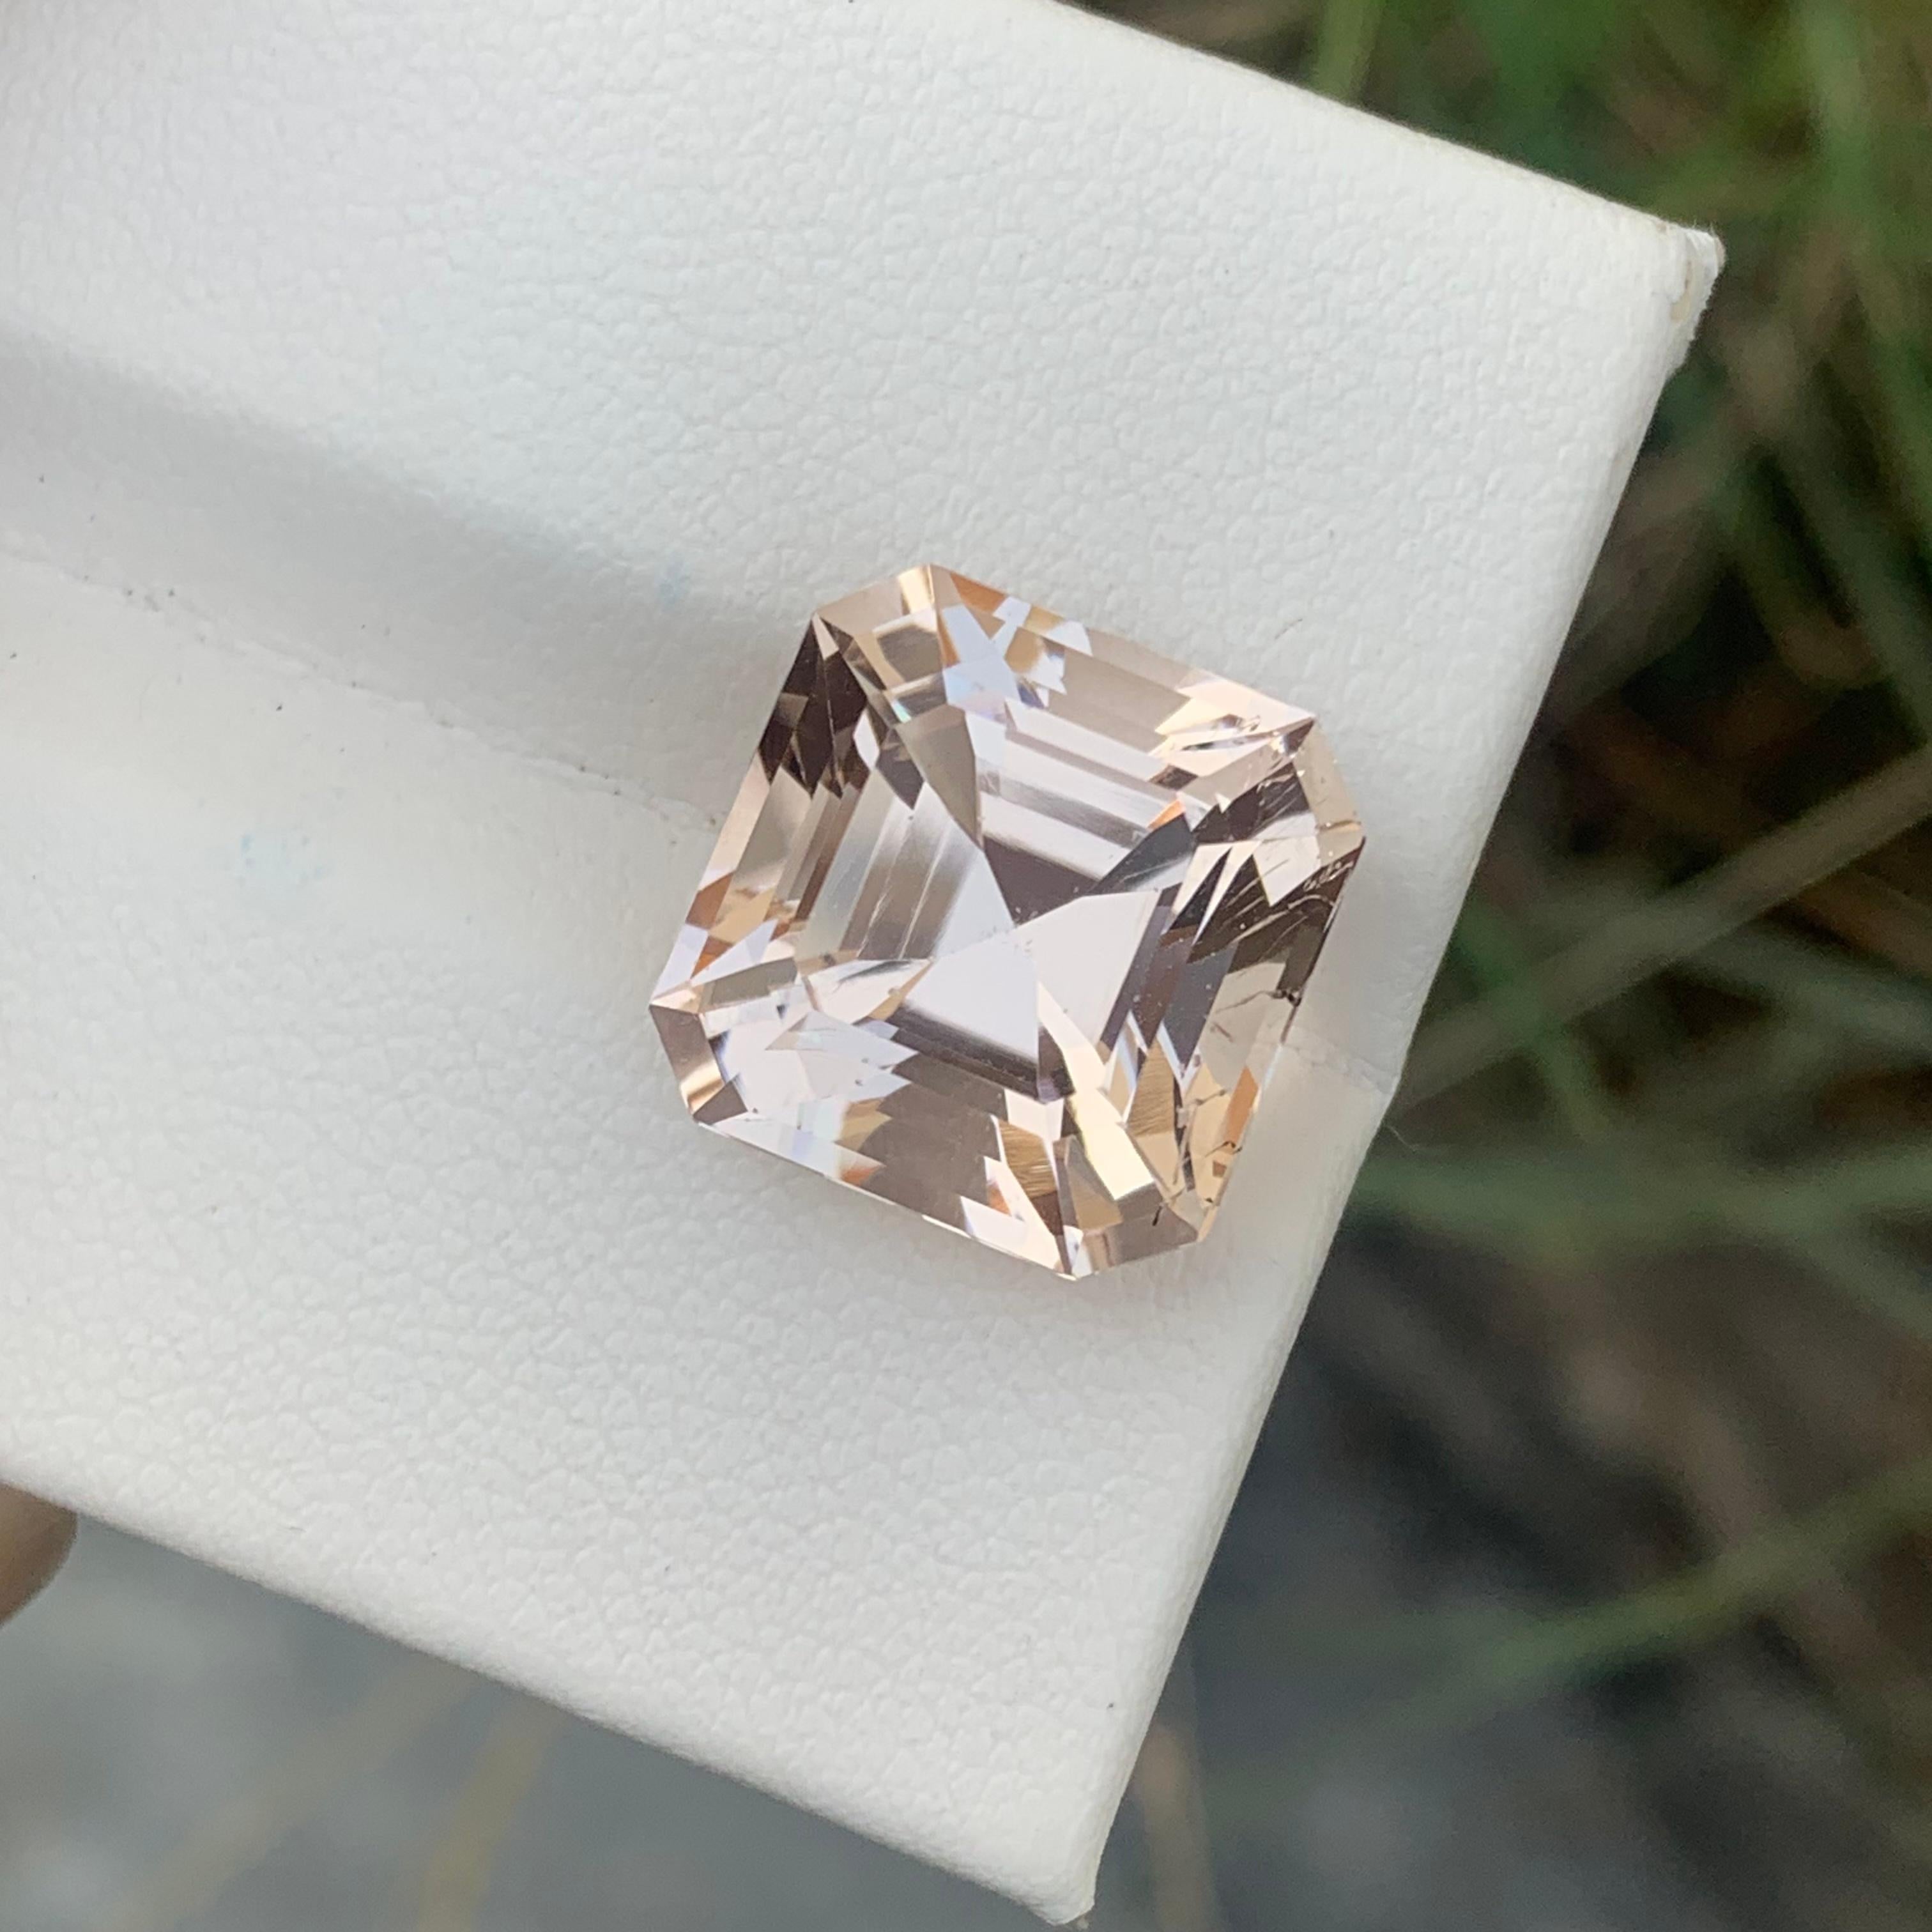 12.15 Carats Natural Loose Imperial Morganite Asscher Cut Gem For Jewelry Making 5